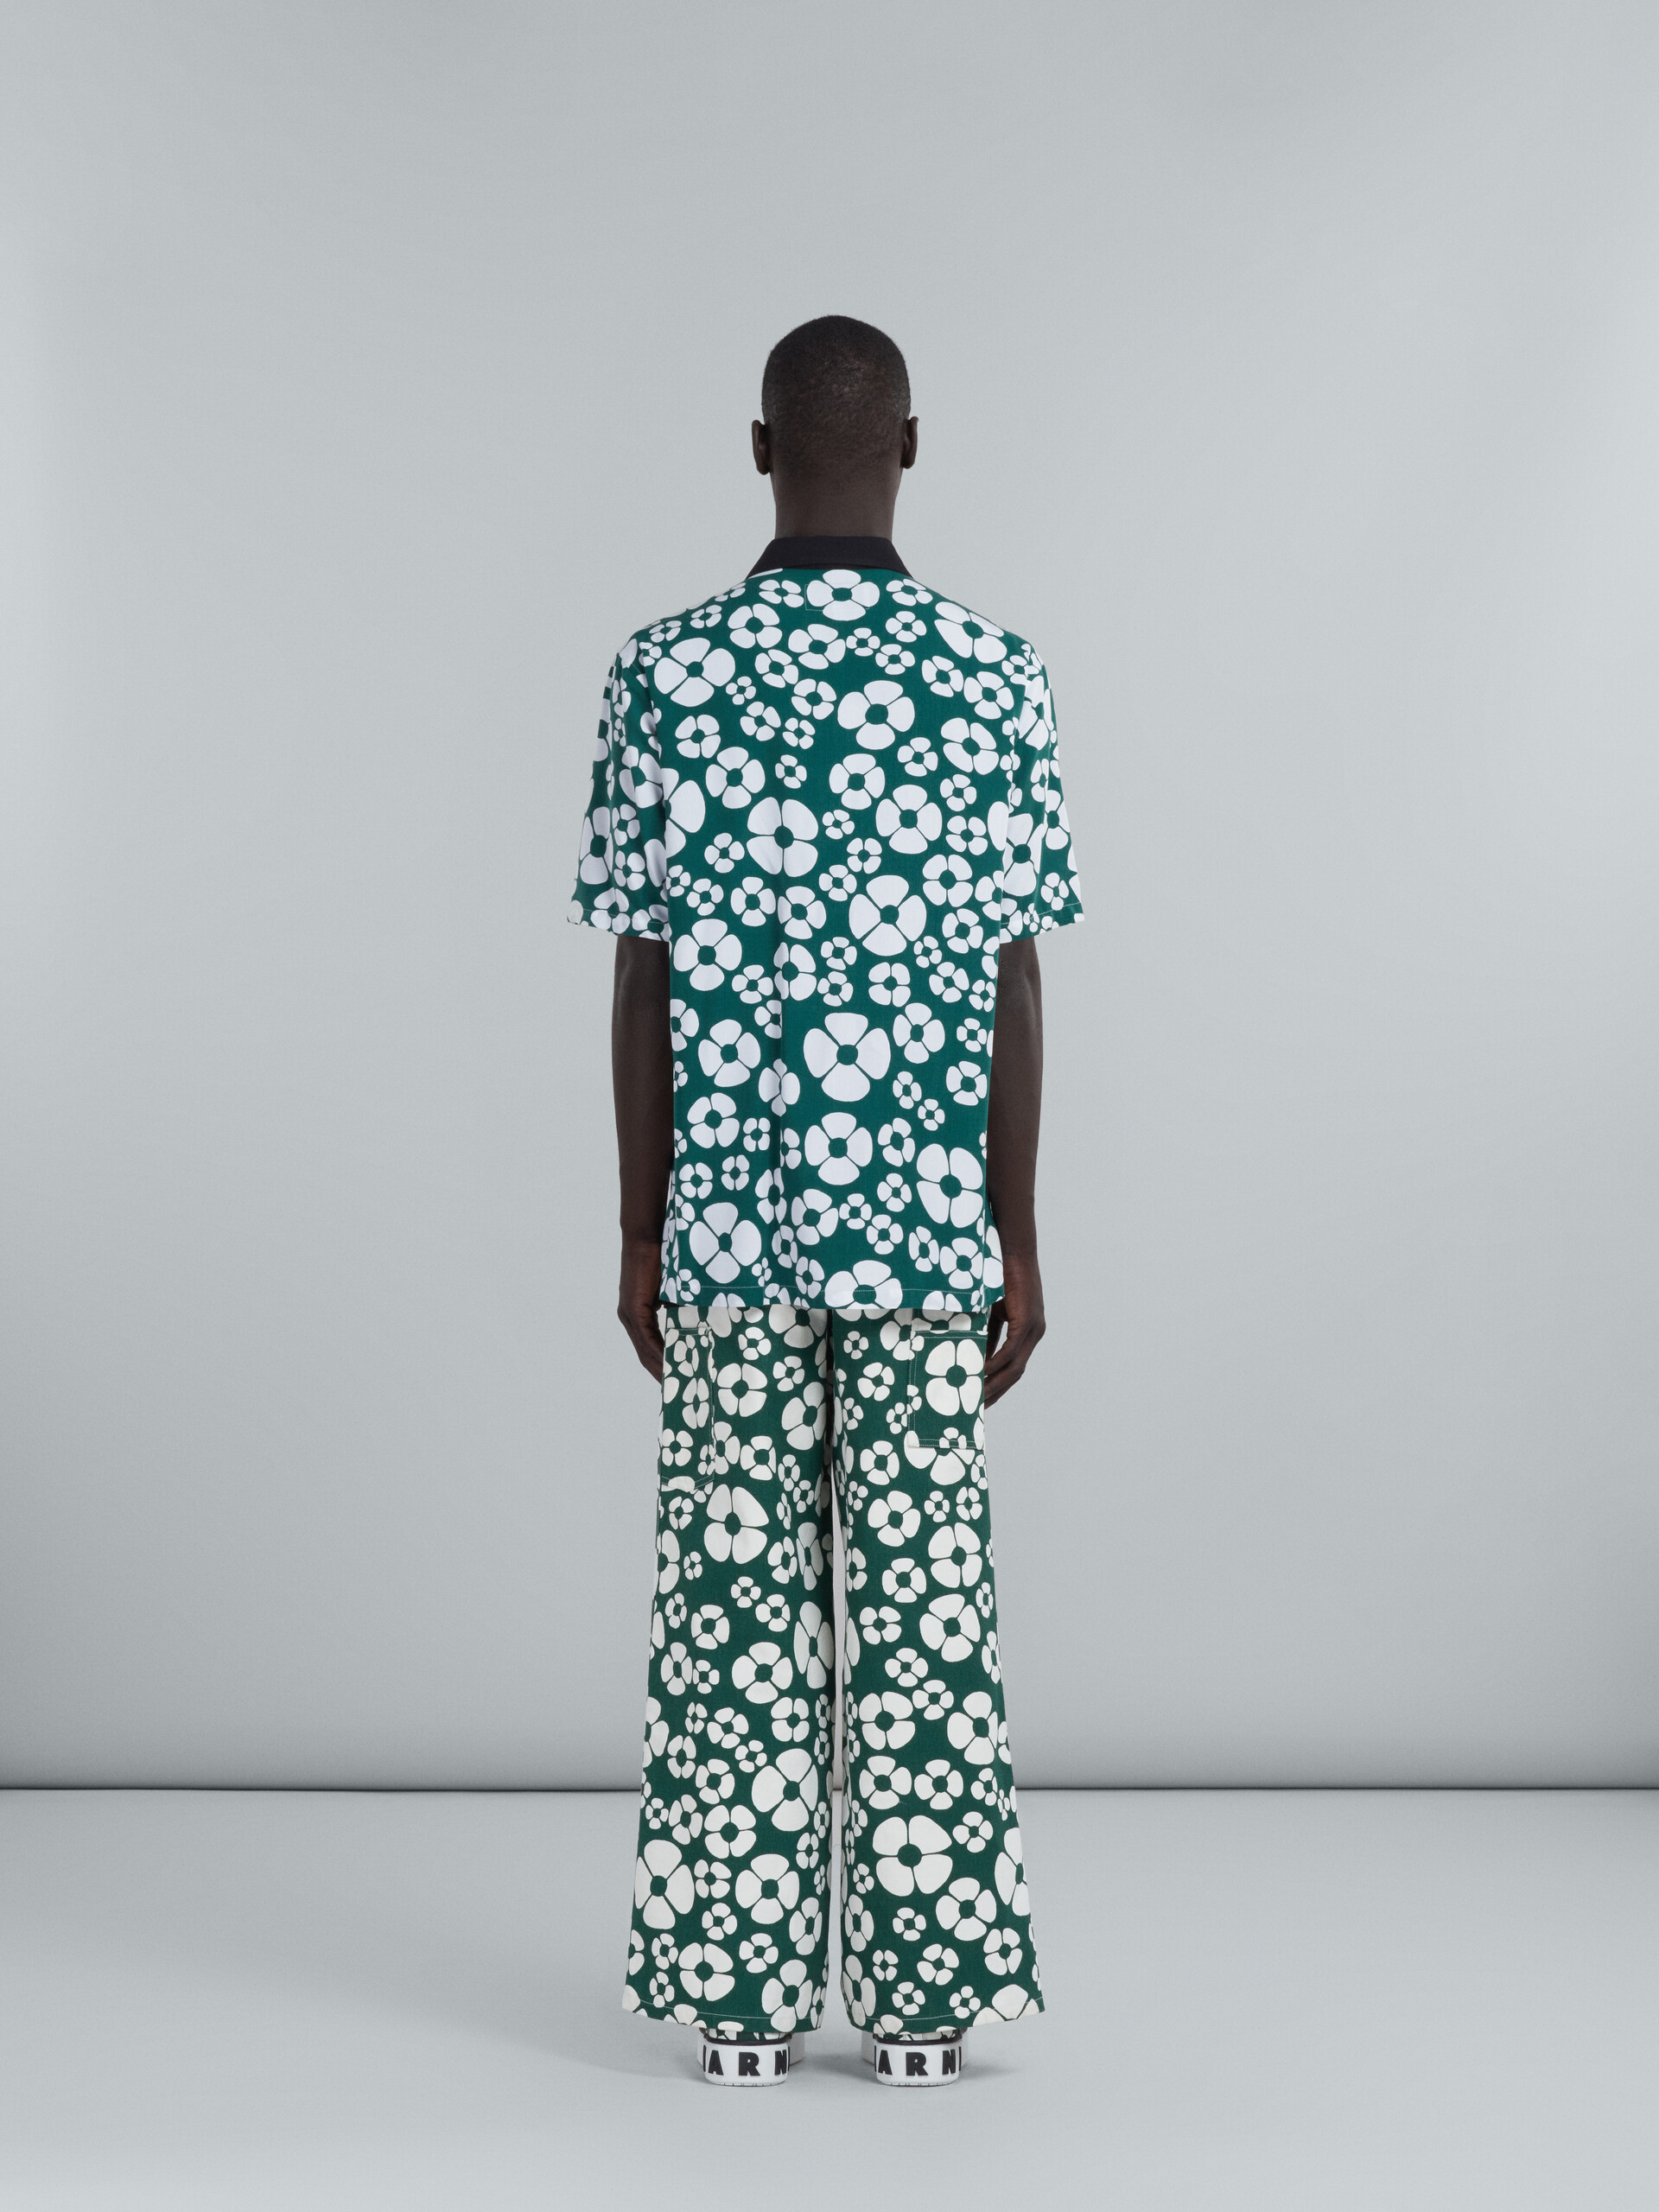 MARNI x CARHARTT WIP - green floral trousers - Pants - Image 3